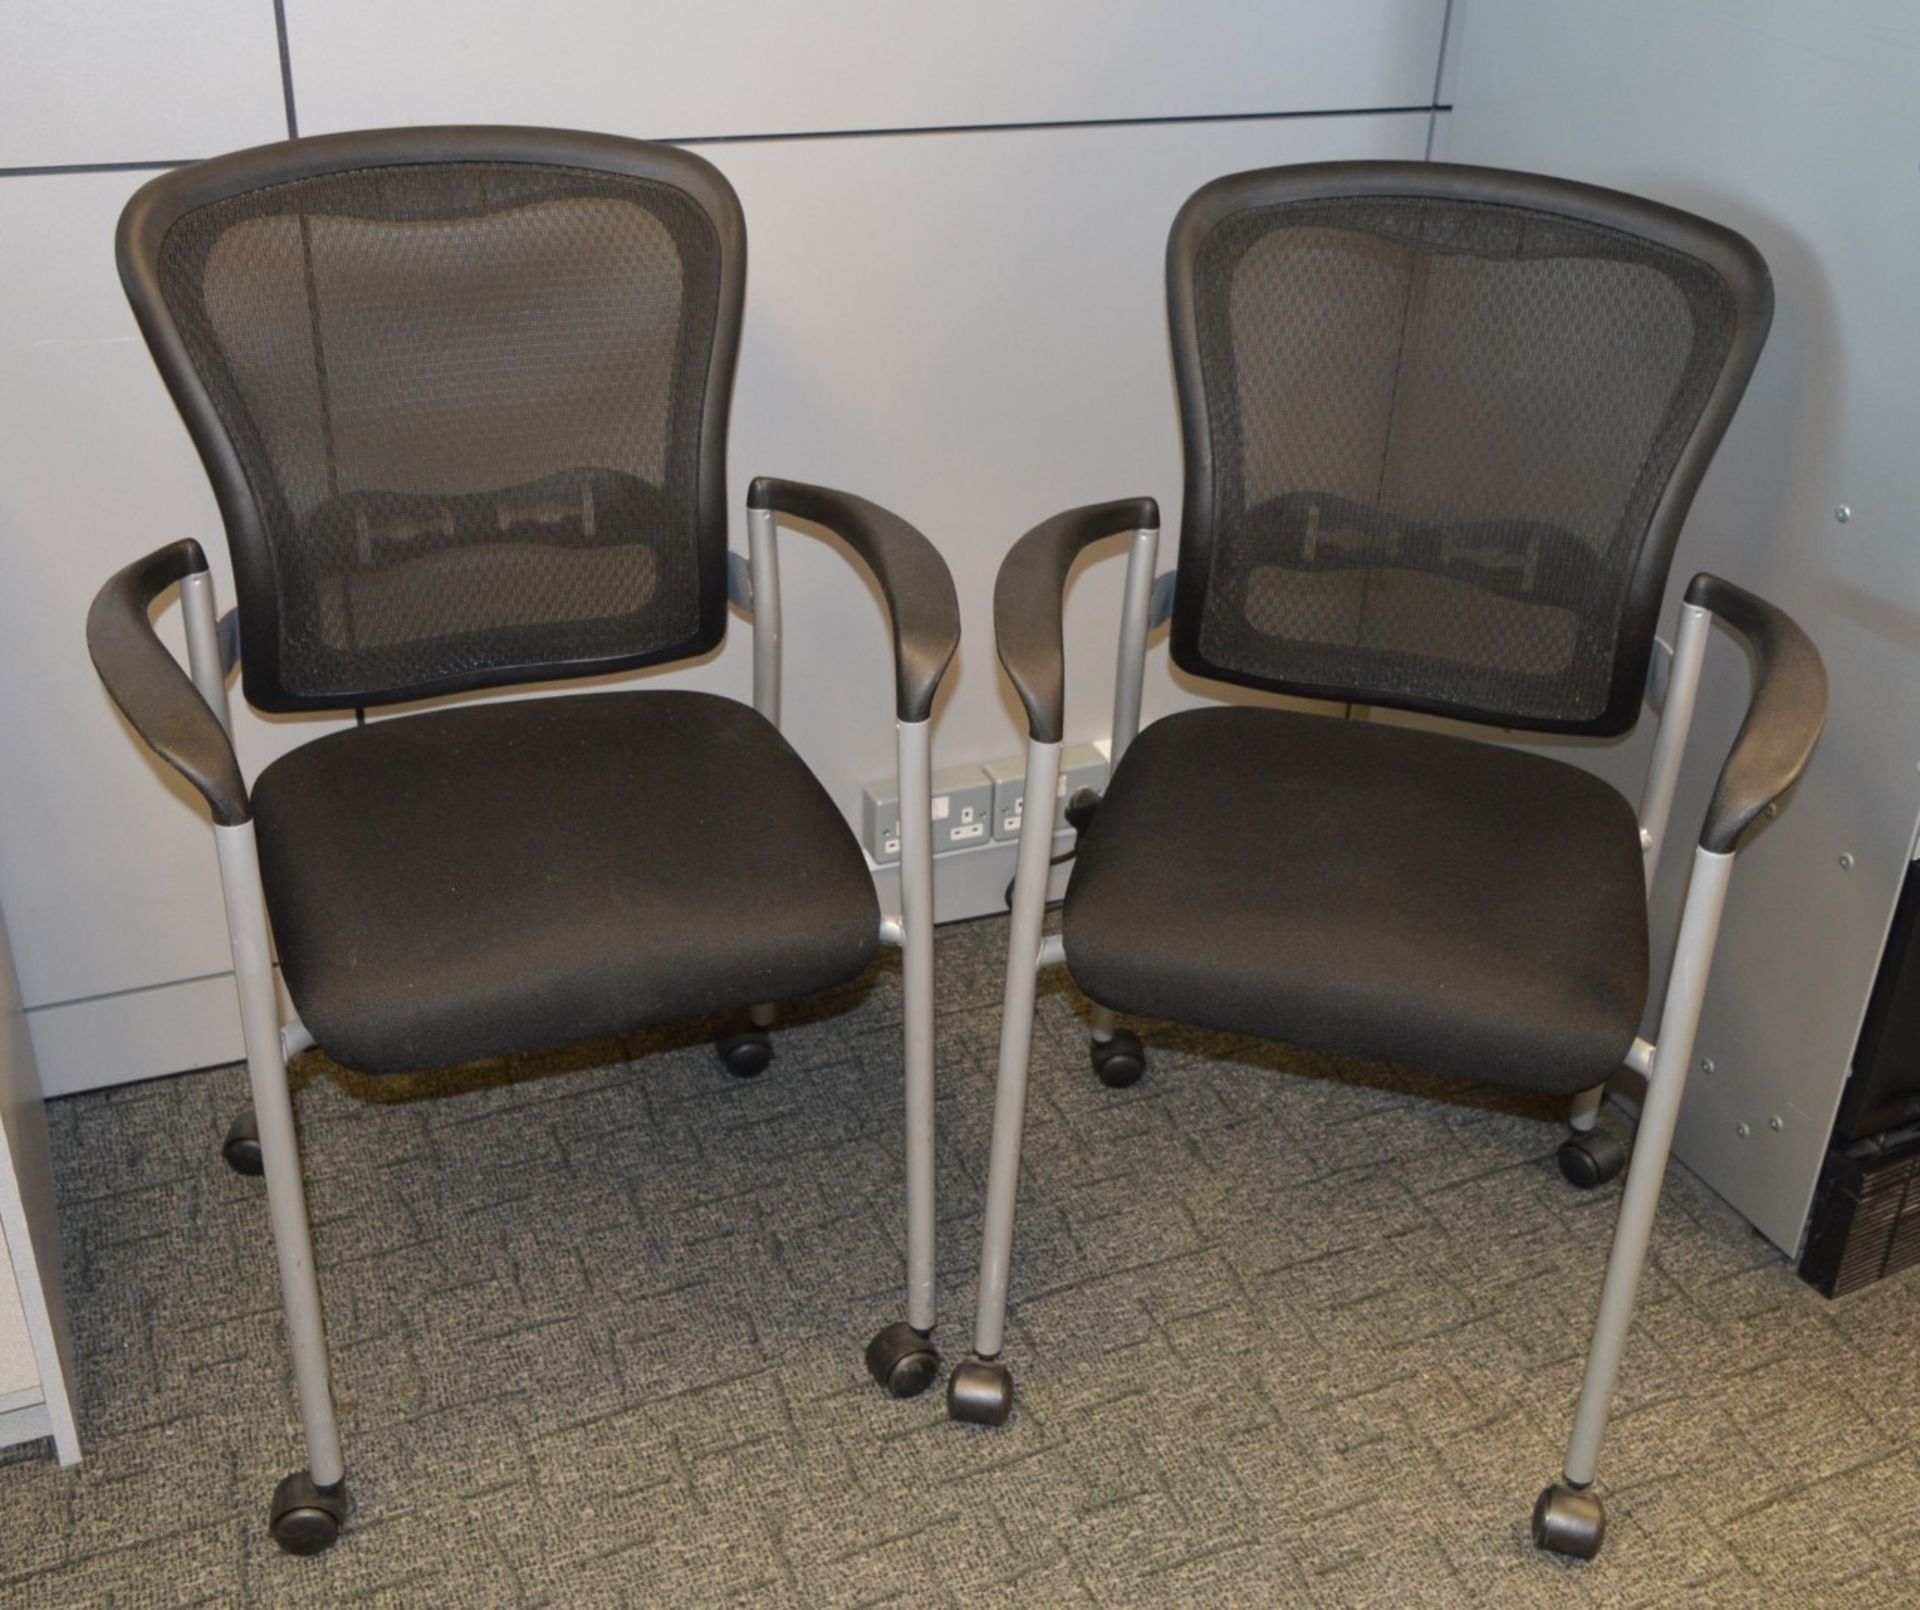 4 x Senator SL829A Office Chairs With Castors - Ergonomical Chairs With Armrests - High Quality